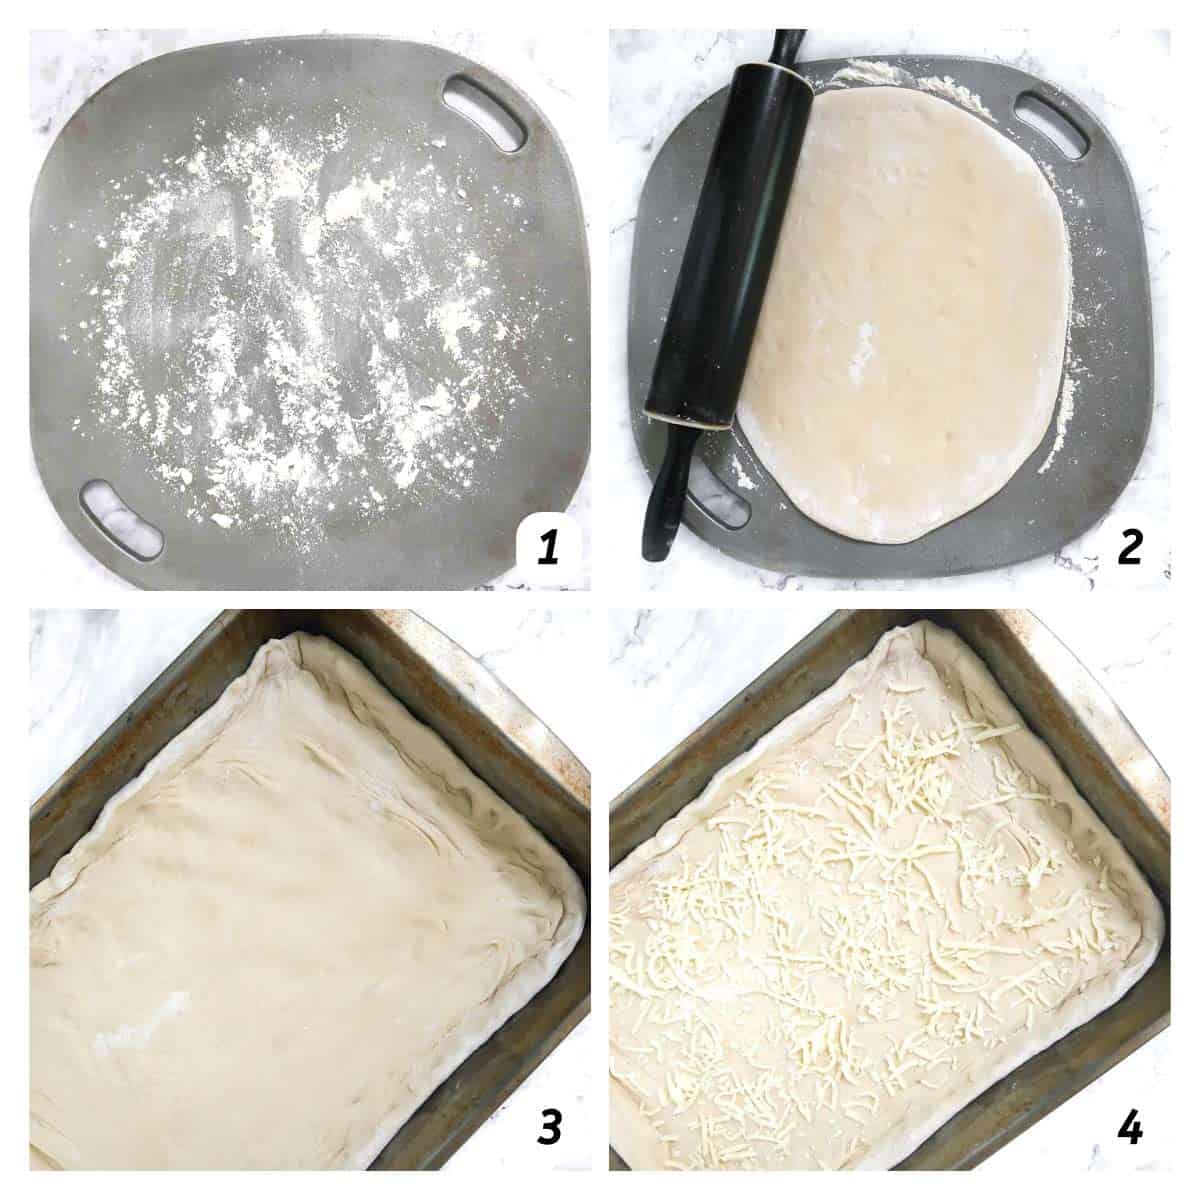 Four panel grid of process shots 1-4 - flouring surface, rolling dough, placing in pan, and layering cheese.